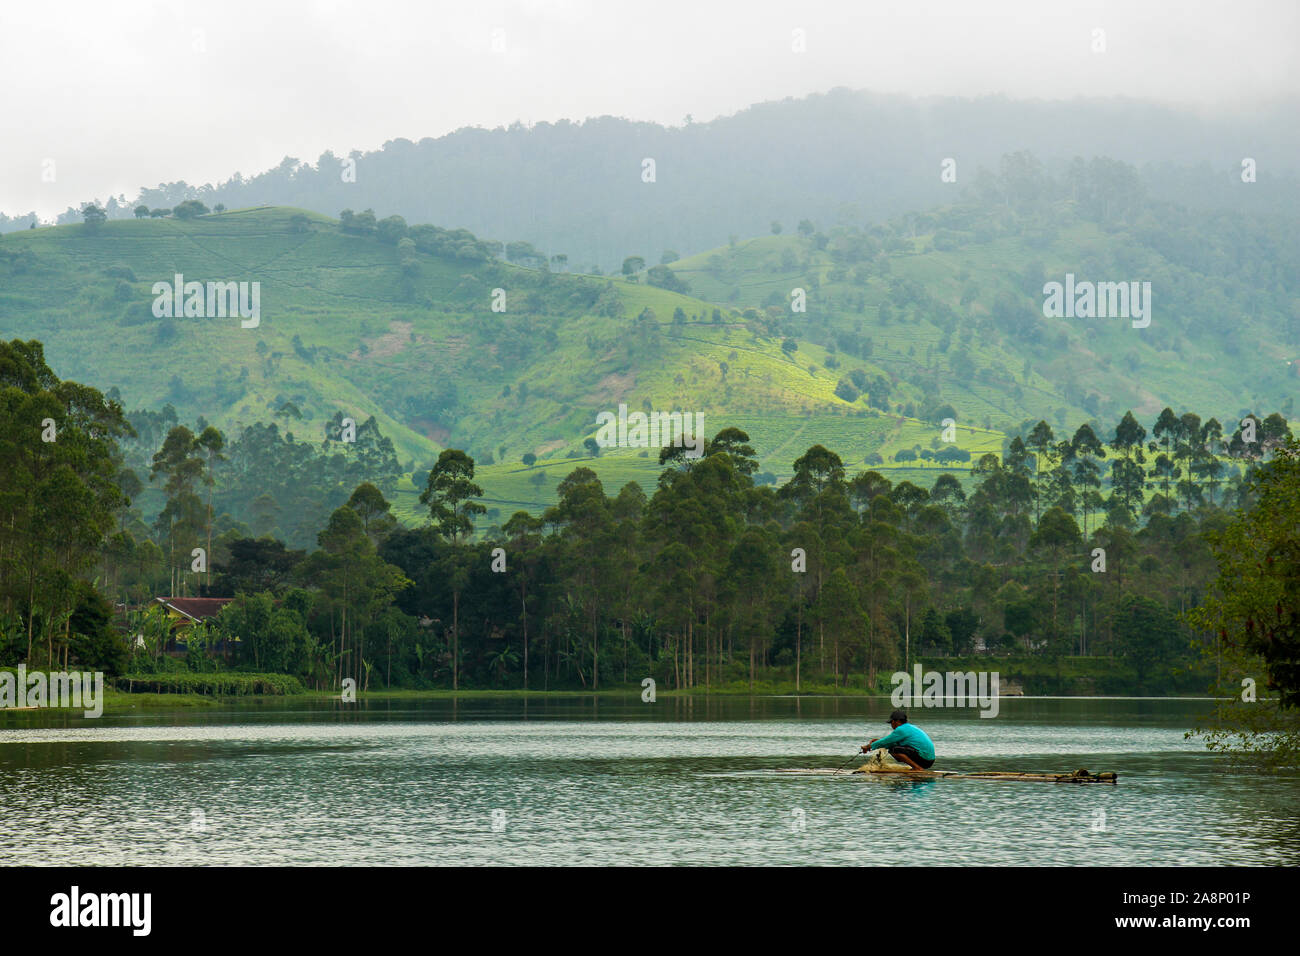 Indonesian Fisherman on bamboo raft with hill in the background, at Cileunca Lake, Pangalengan, Bandung, West Java, Indonesia Stock Photo